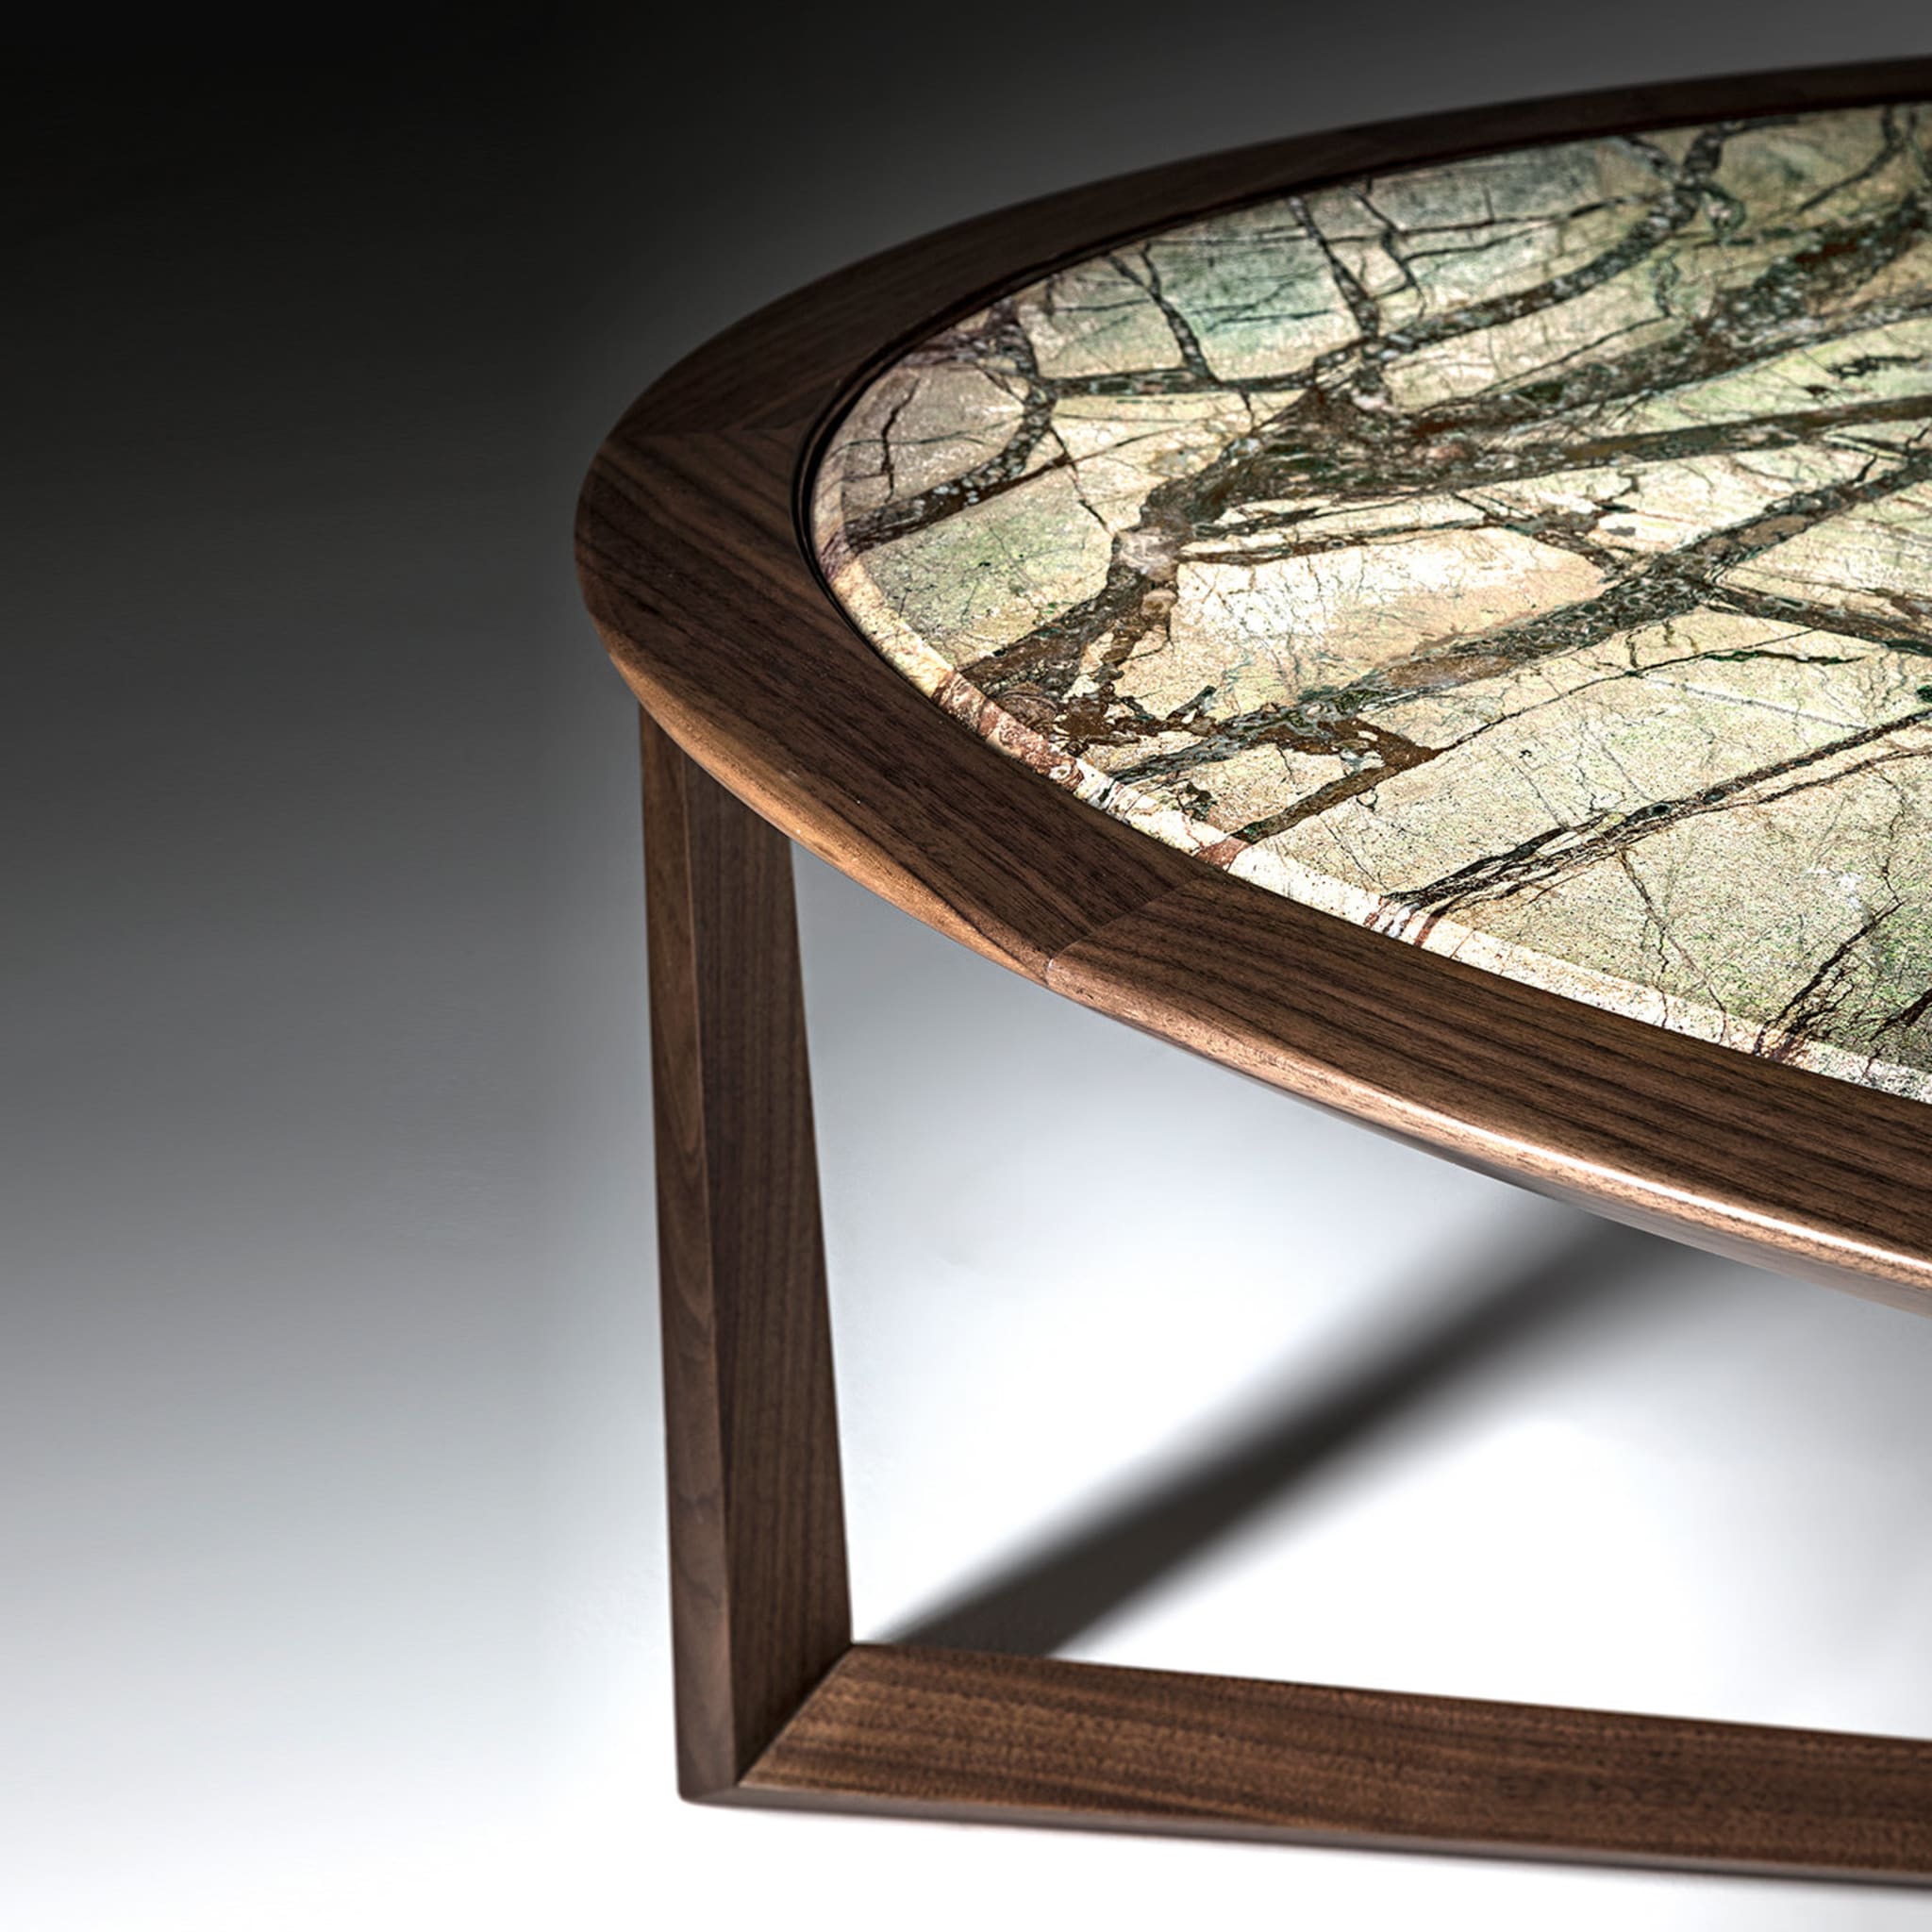 Triangolo Oval Coffee Table by Ivano Colombo - Alternative view 1